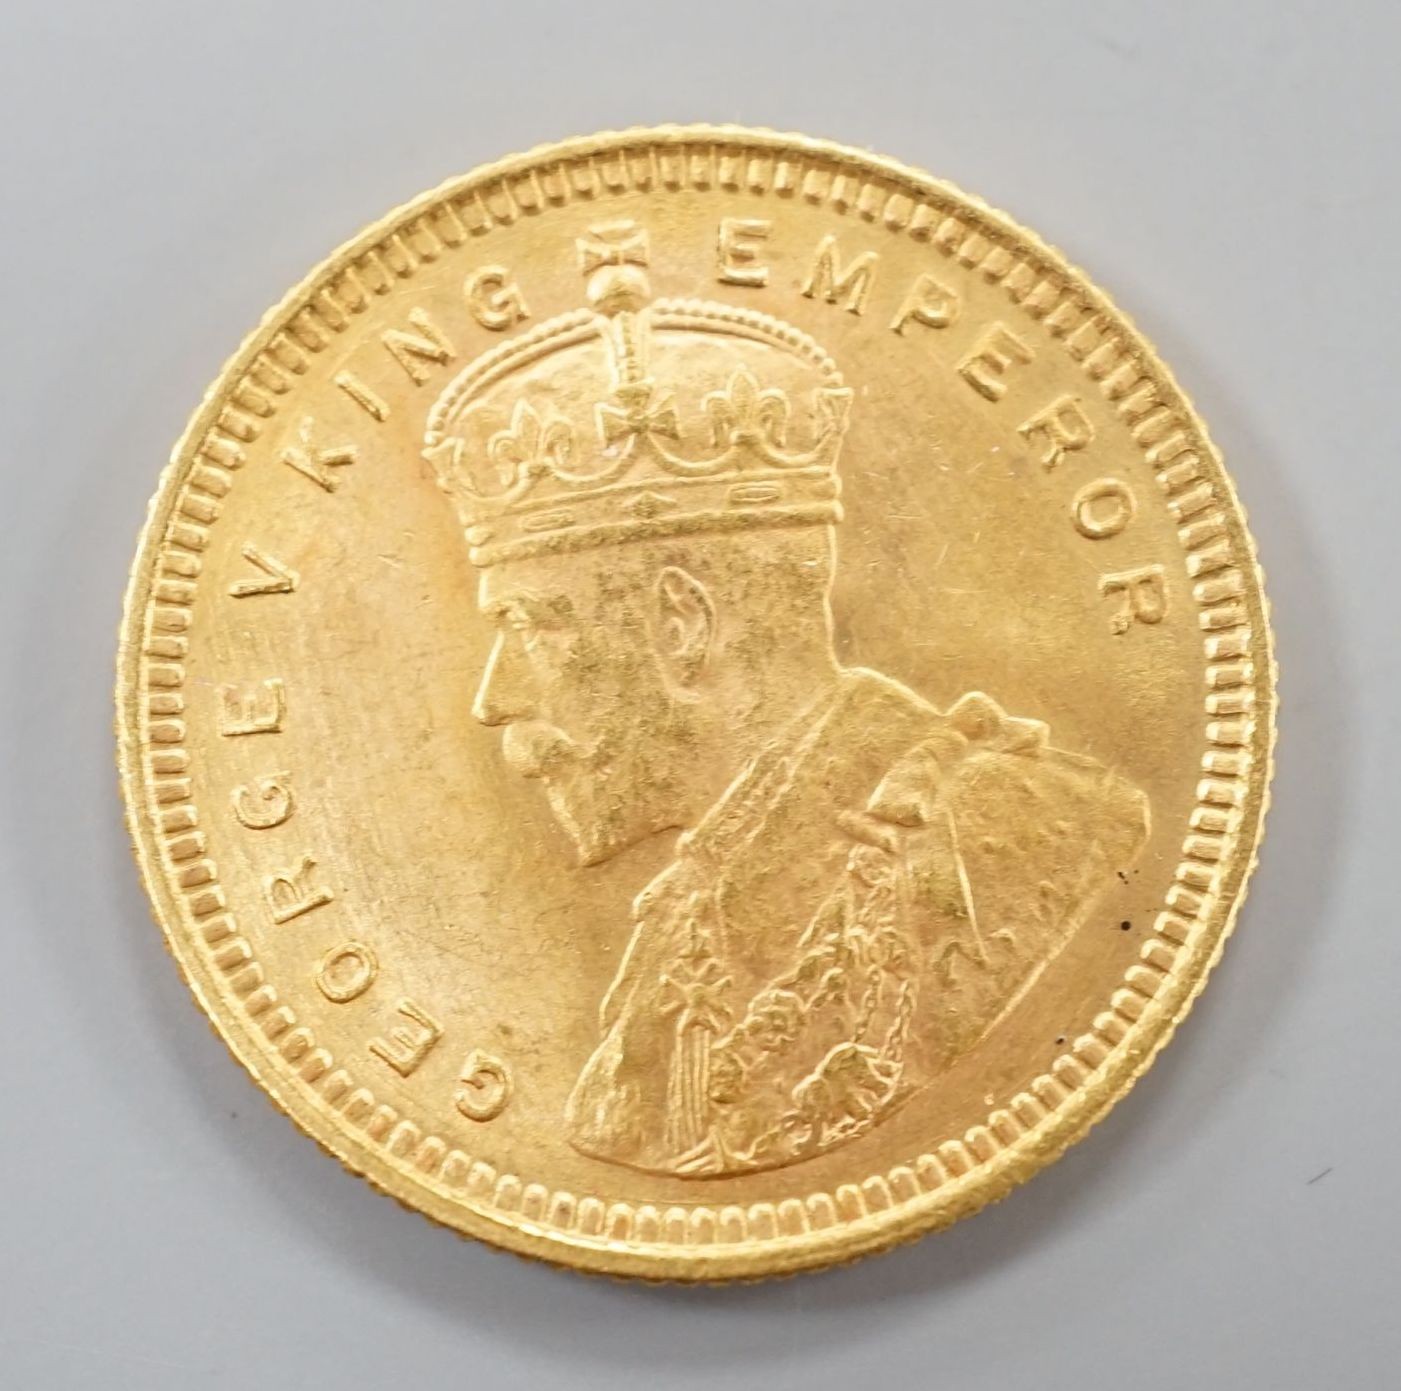 British India, George VI 15 gold rupees 1918, area of edge worn otherwise VF